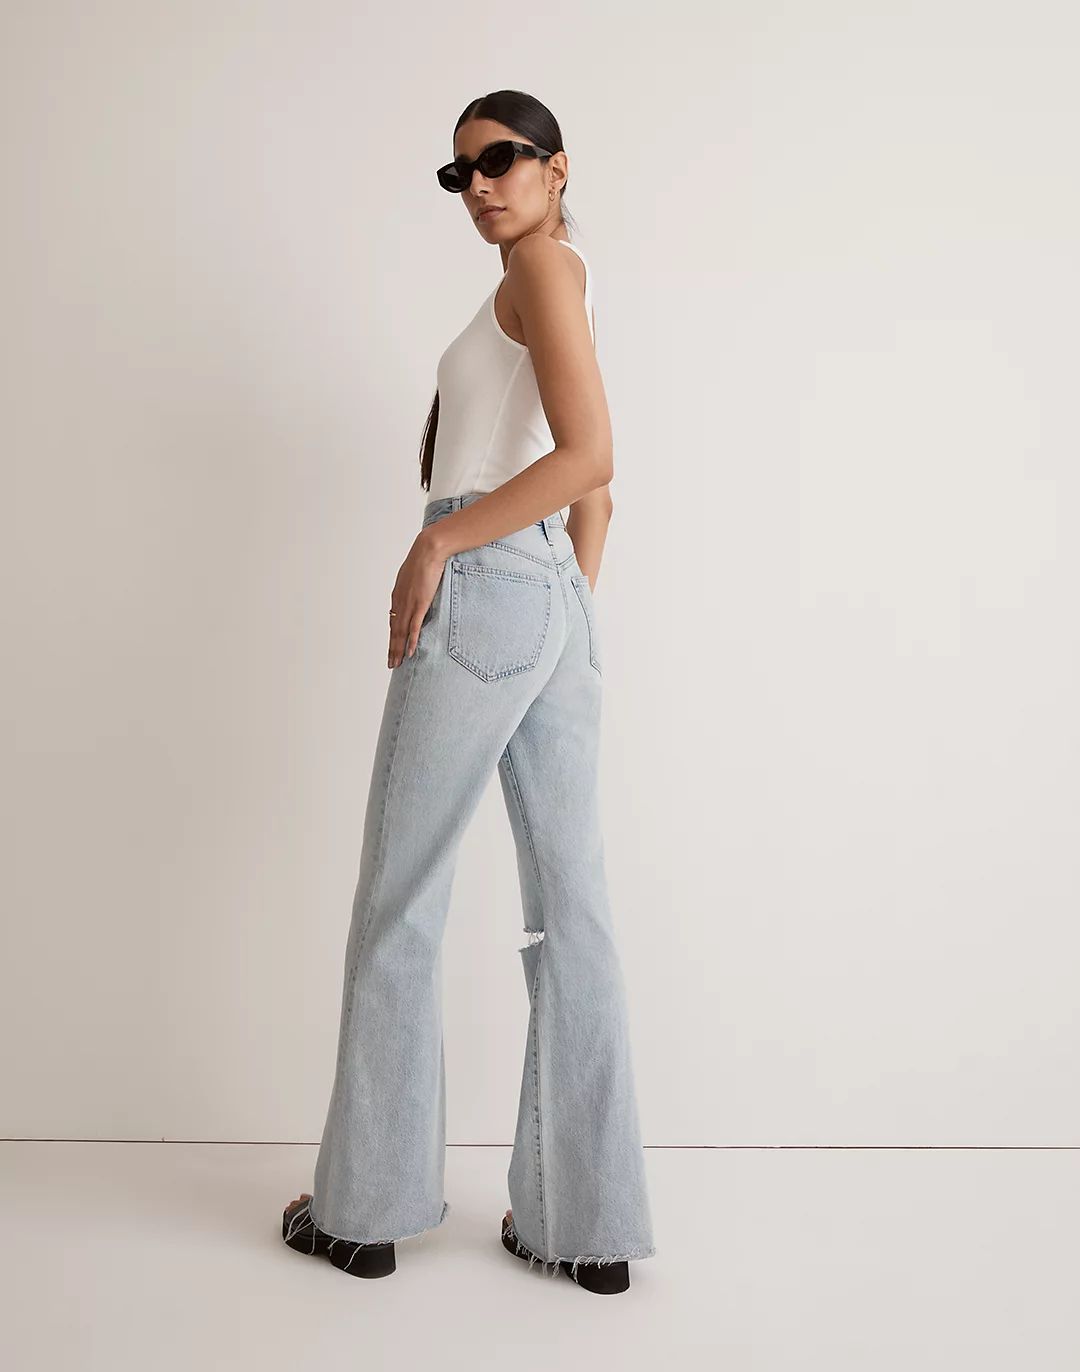 Baggy Flare Jeans in Luzon Wash: Knee-Slit Edition | Madewell